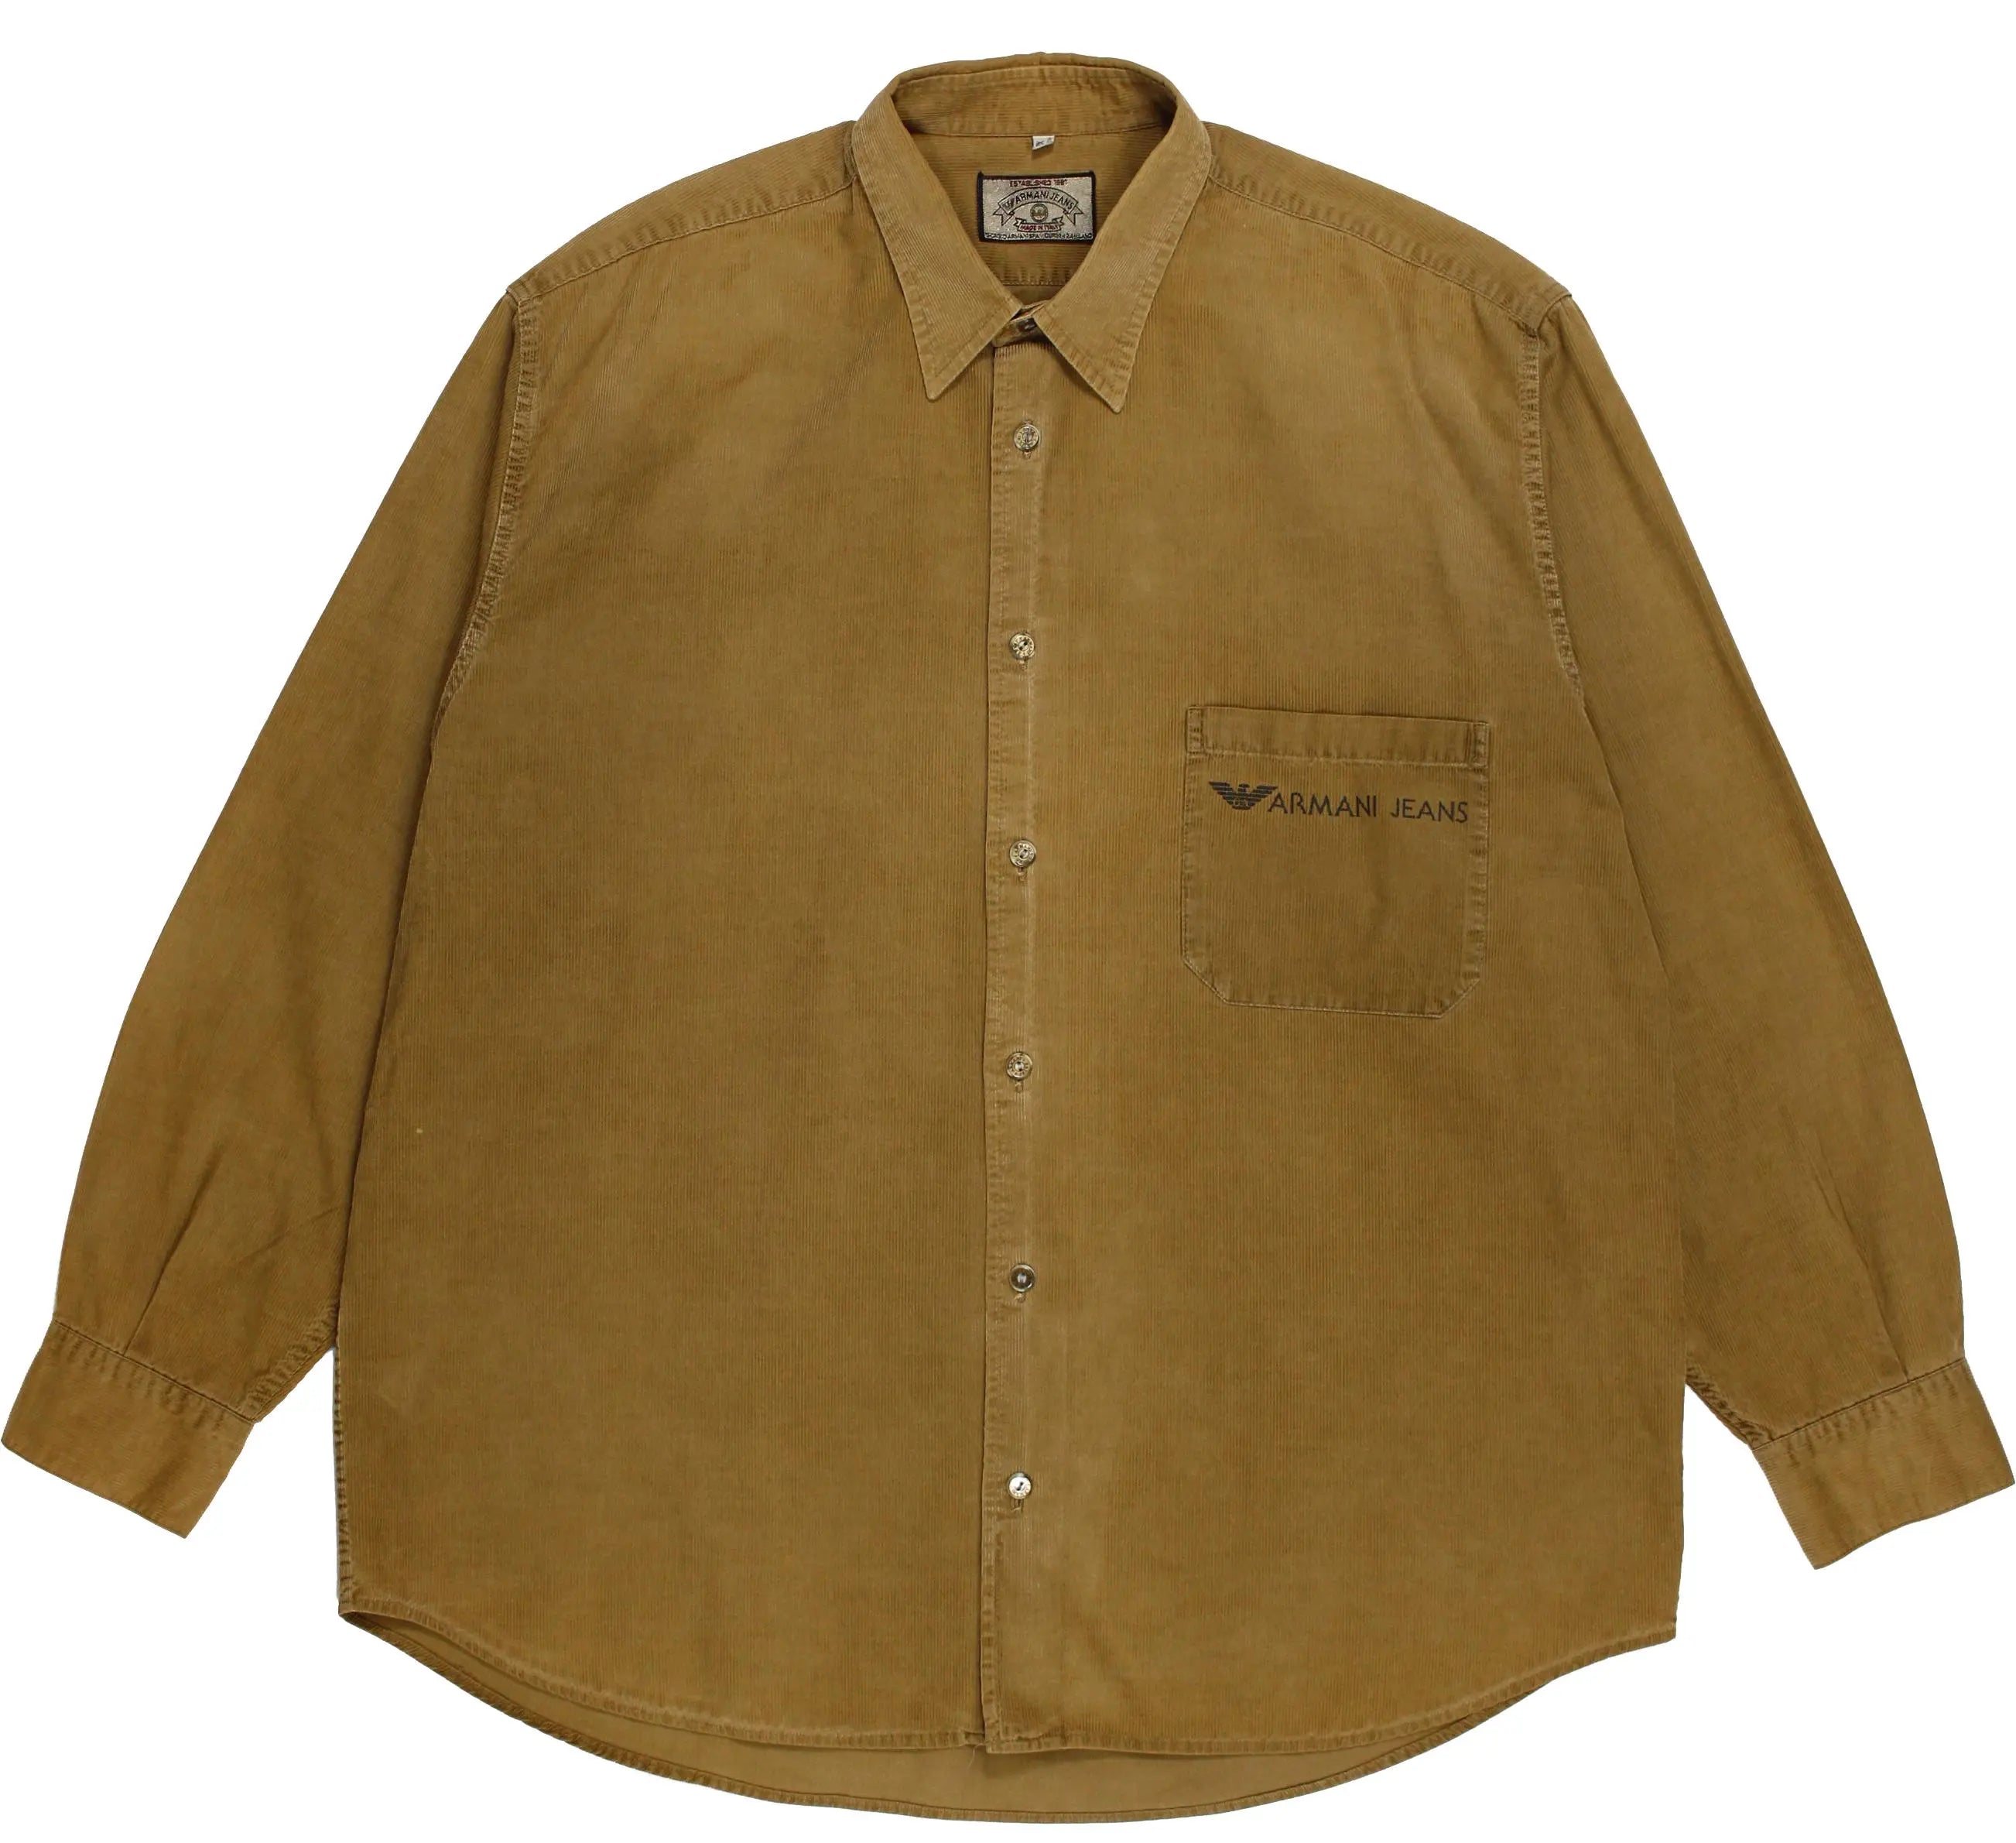 Armani Jeans - Corduroy Shirt by Armani Jeans- ThriftTale.com - Vintage and second handclothing